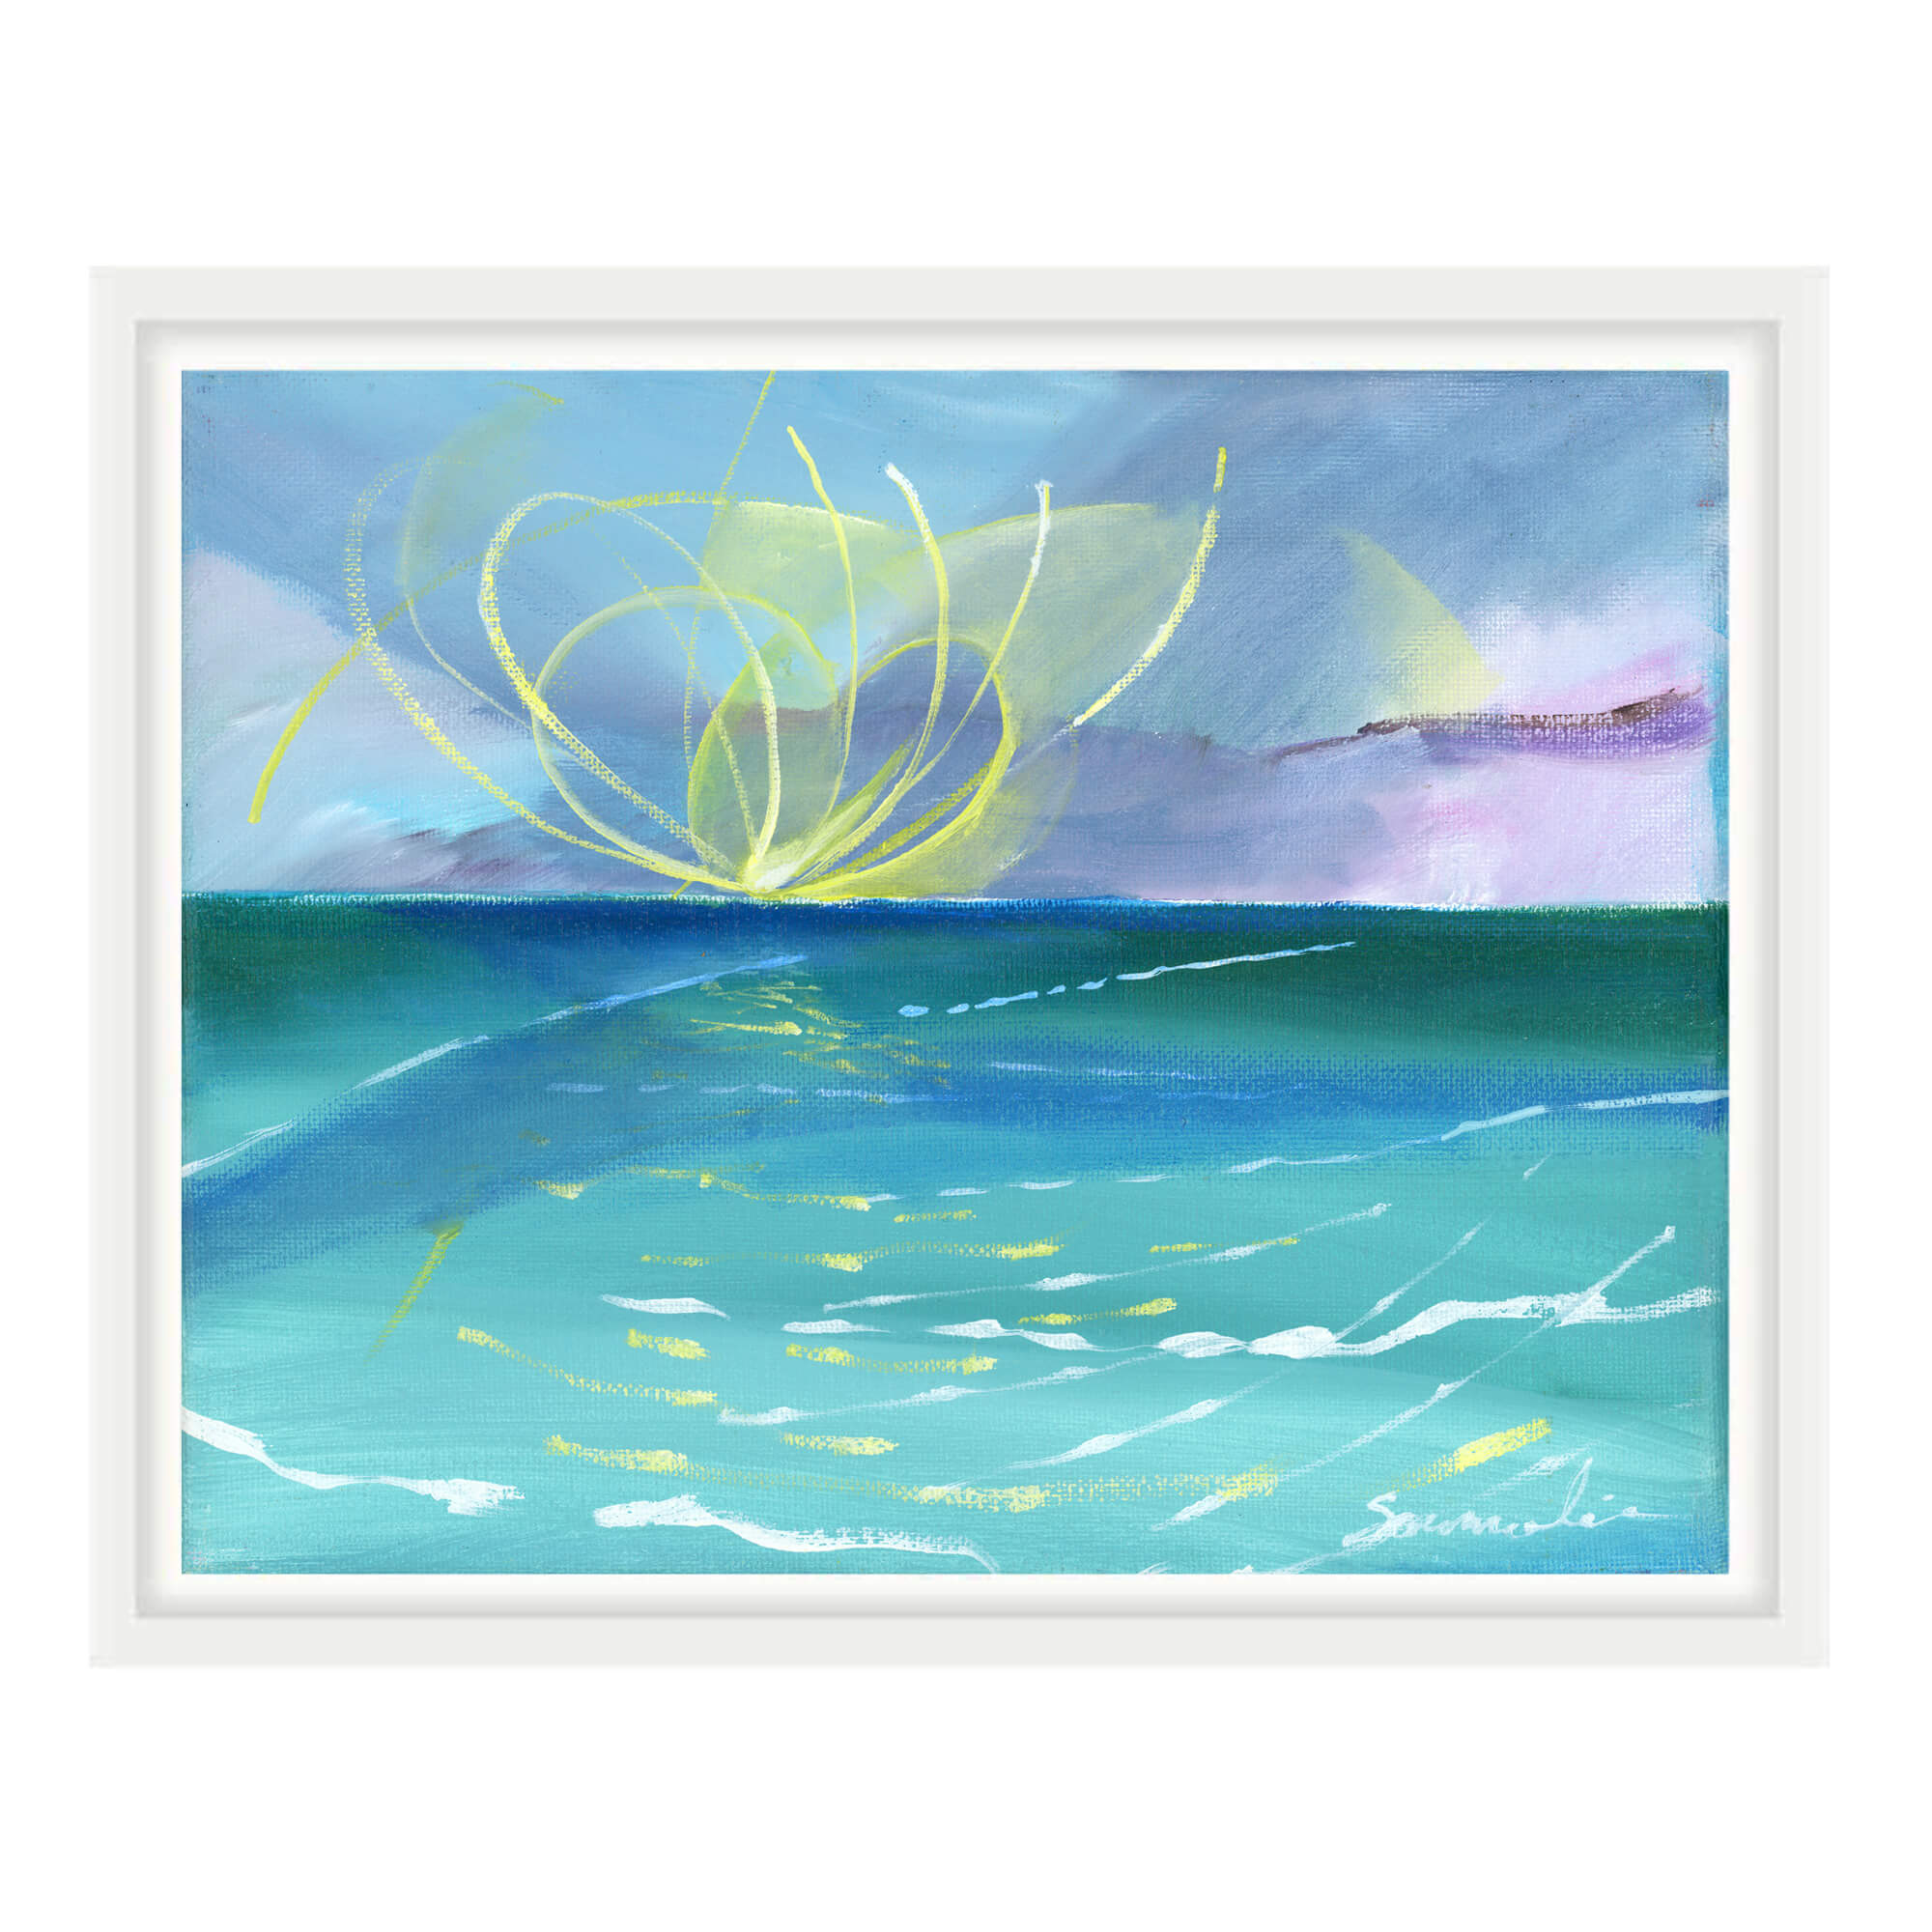 Semi abstract painting of a calm ocean by Hawaii artist Saumolia Puapuaga